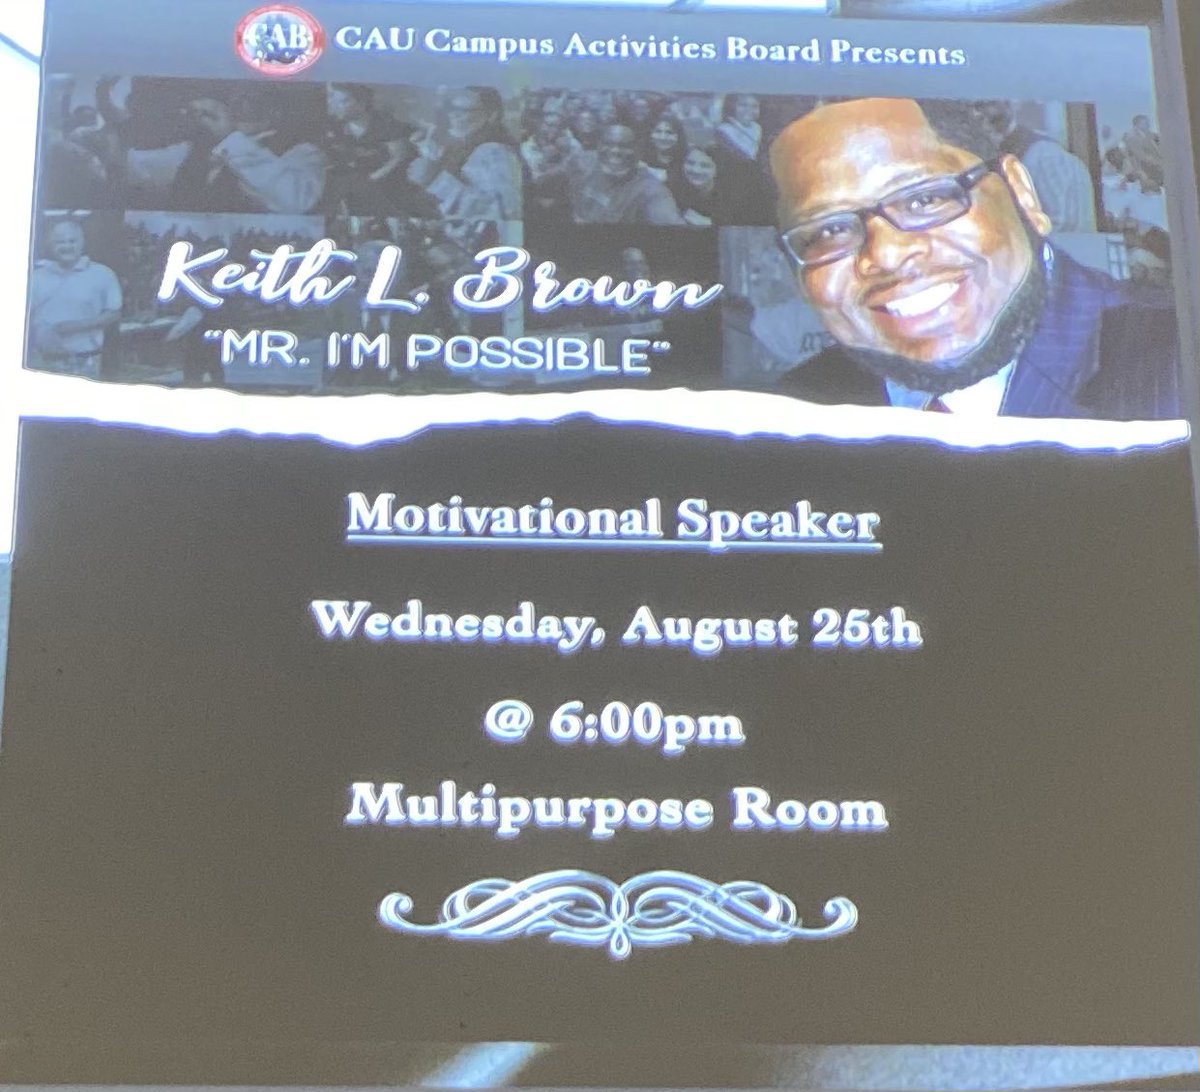 Getting ready to Inspire and Ignite THE @CAU. Let’s gooooooo!!!! @promotingyou, @AllAmericanEnt_ @DrJessHouston, and the entire “I’m Possible Team,” wish you an epic School Year. #MrImPossible #Clarkatlantauniversity #Keithlbrown #Thetaskbehindthemask.